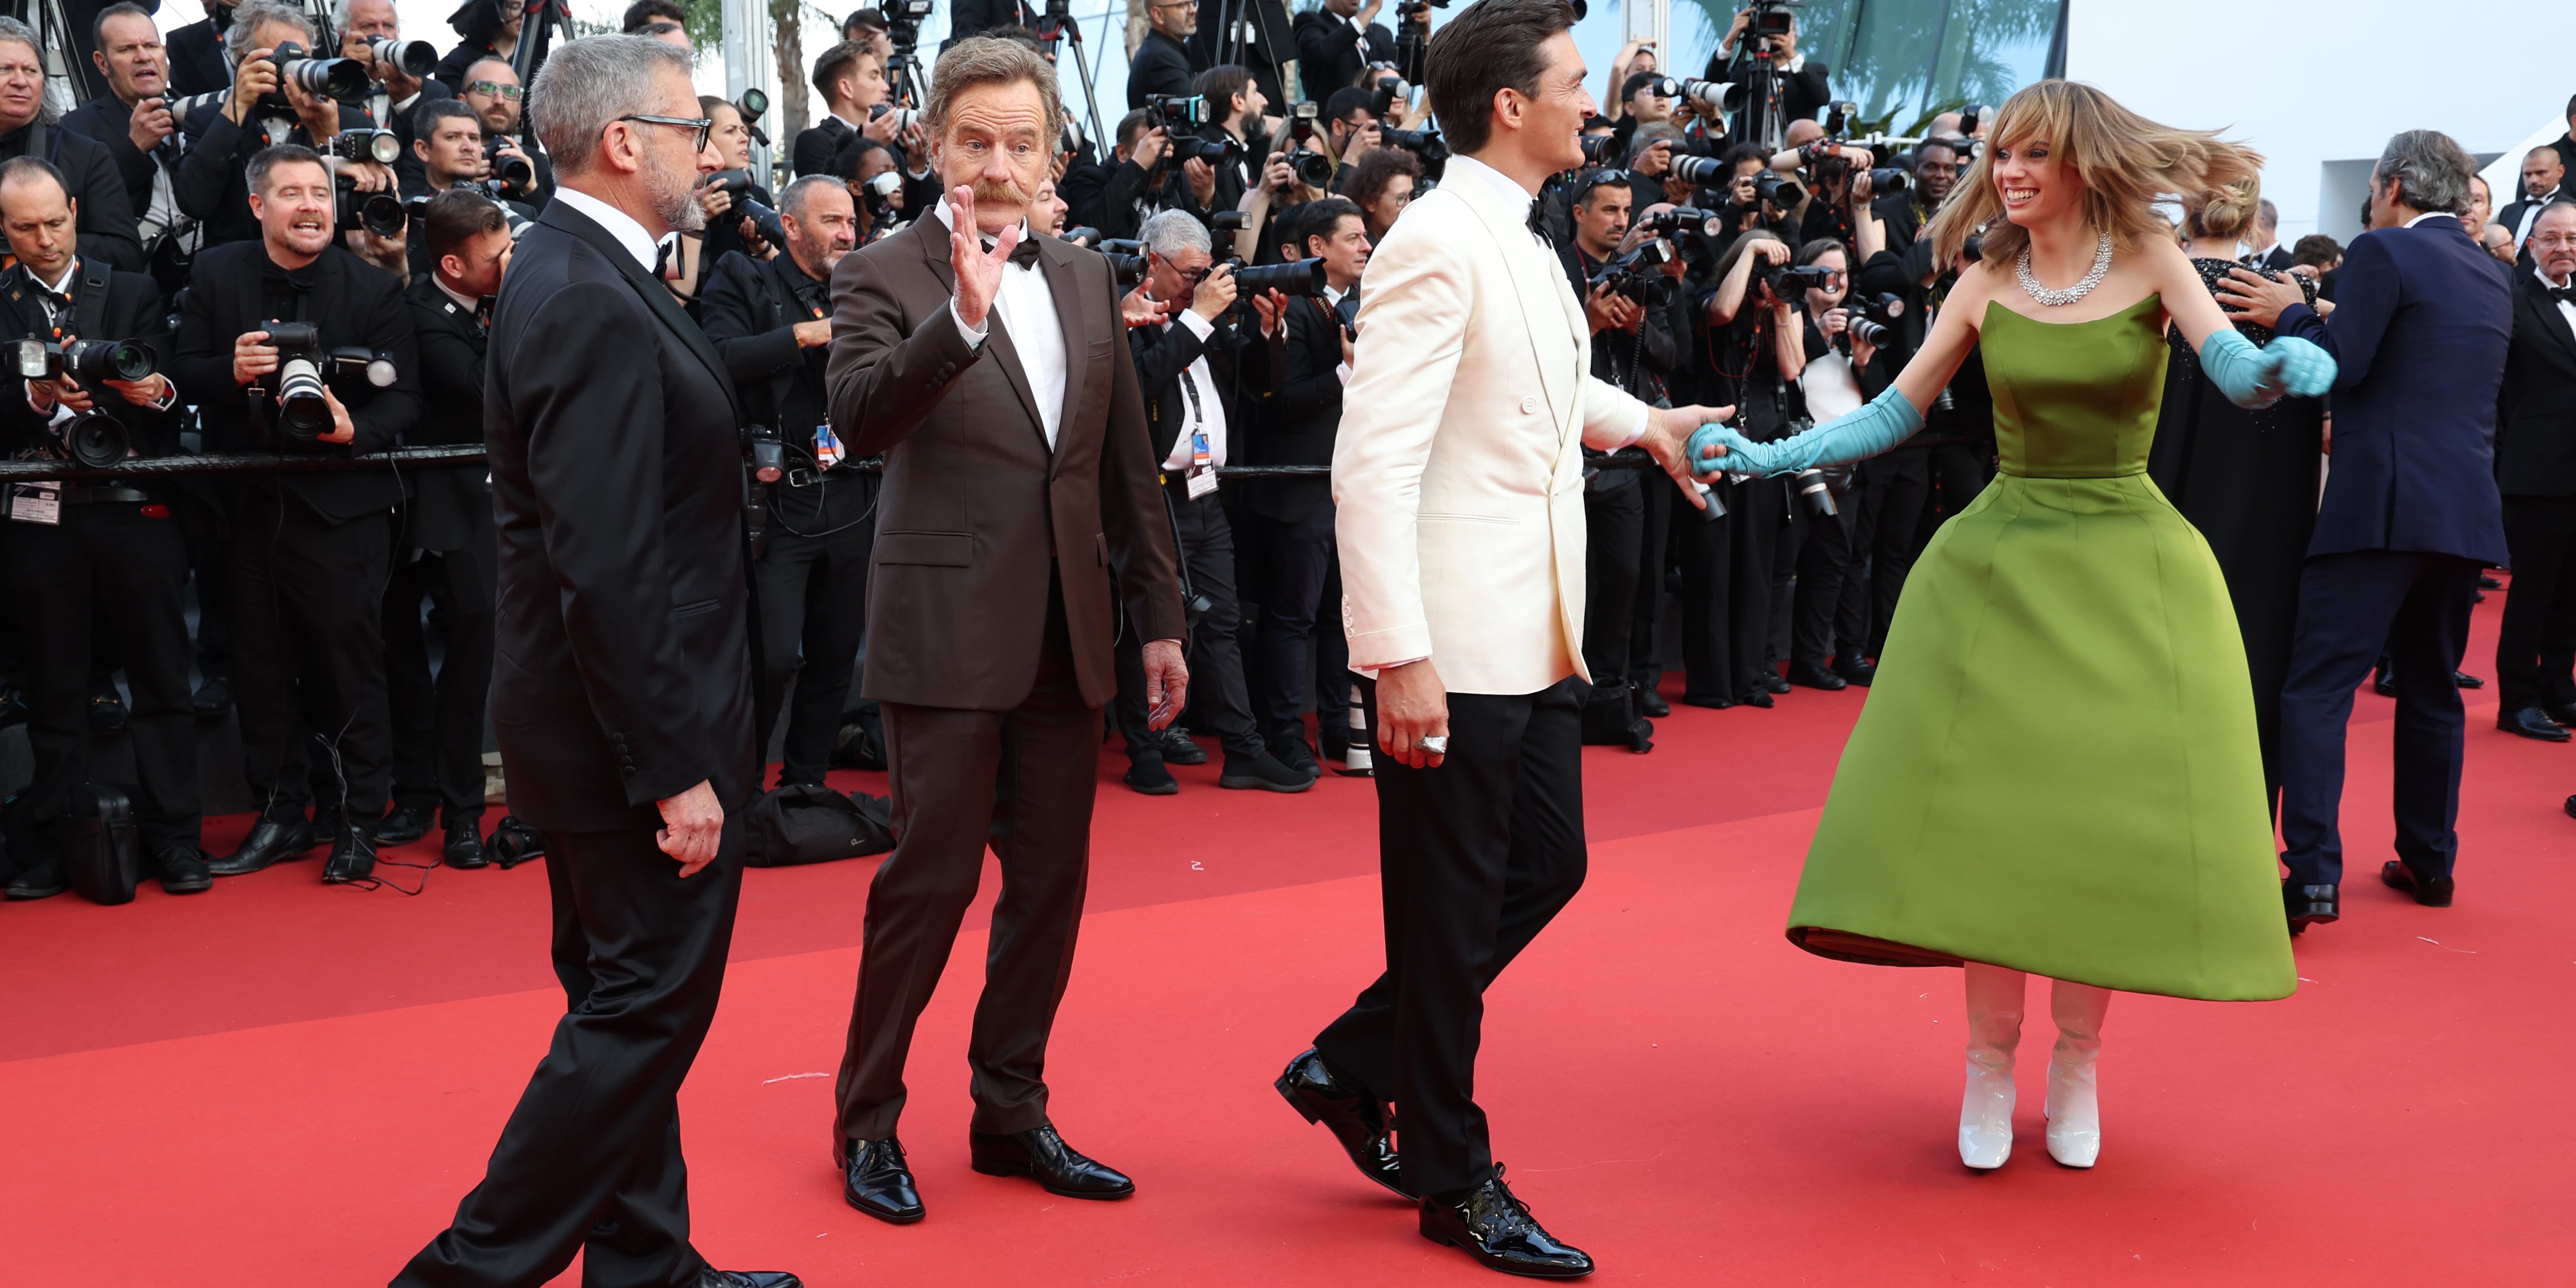 14 of the best red carpet moments of 2022